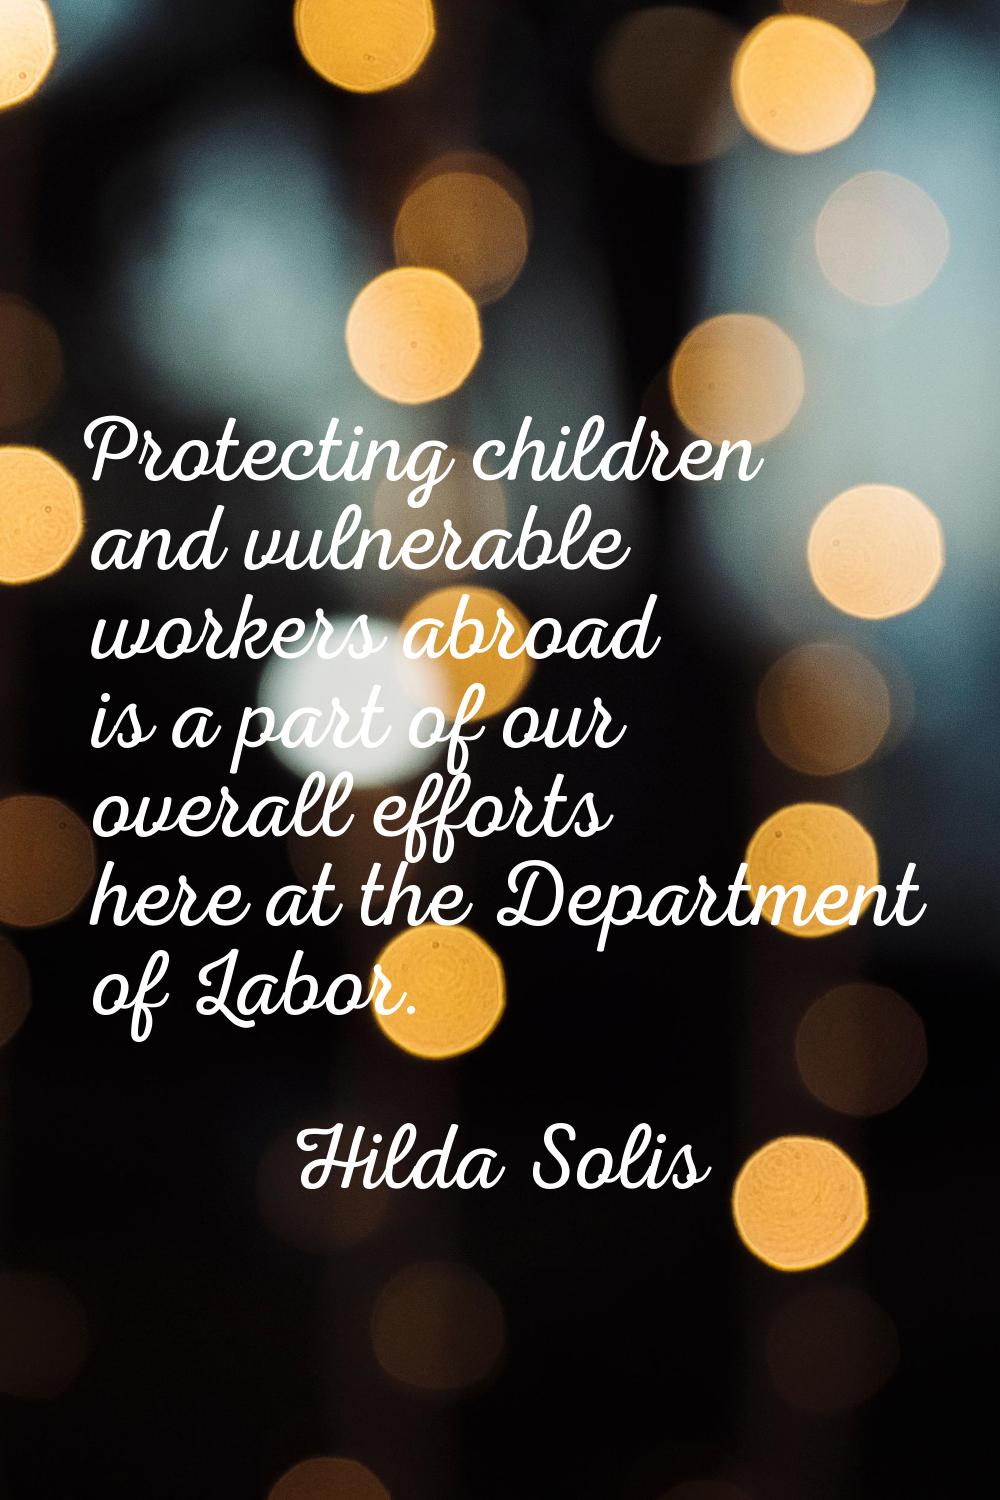 Protecting children and vulnerable workers abroad is a part of our overall efforts here at the Depa